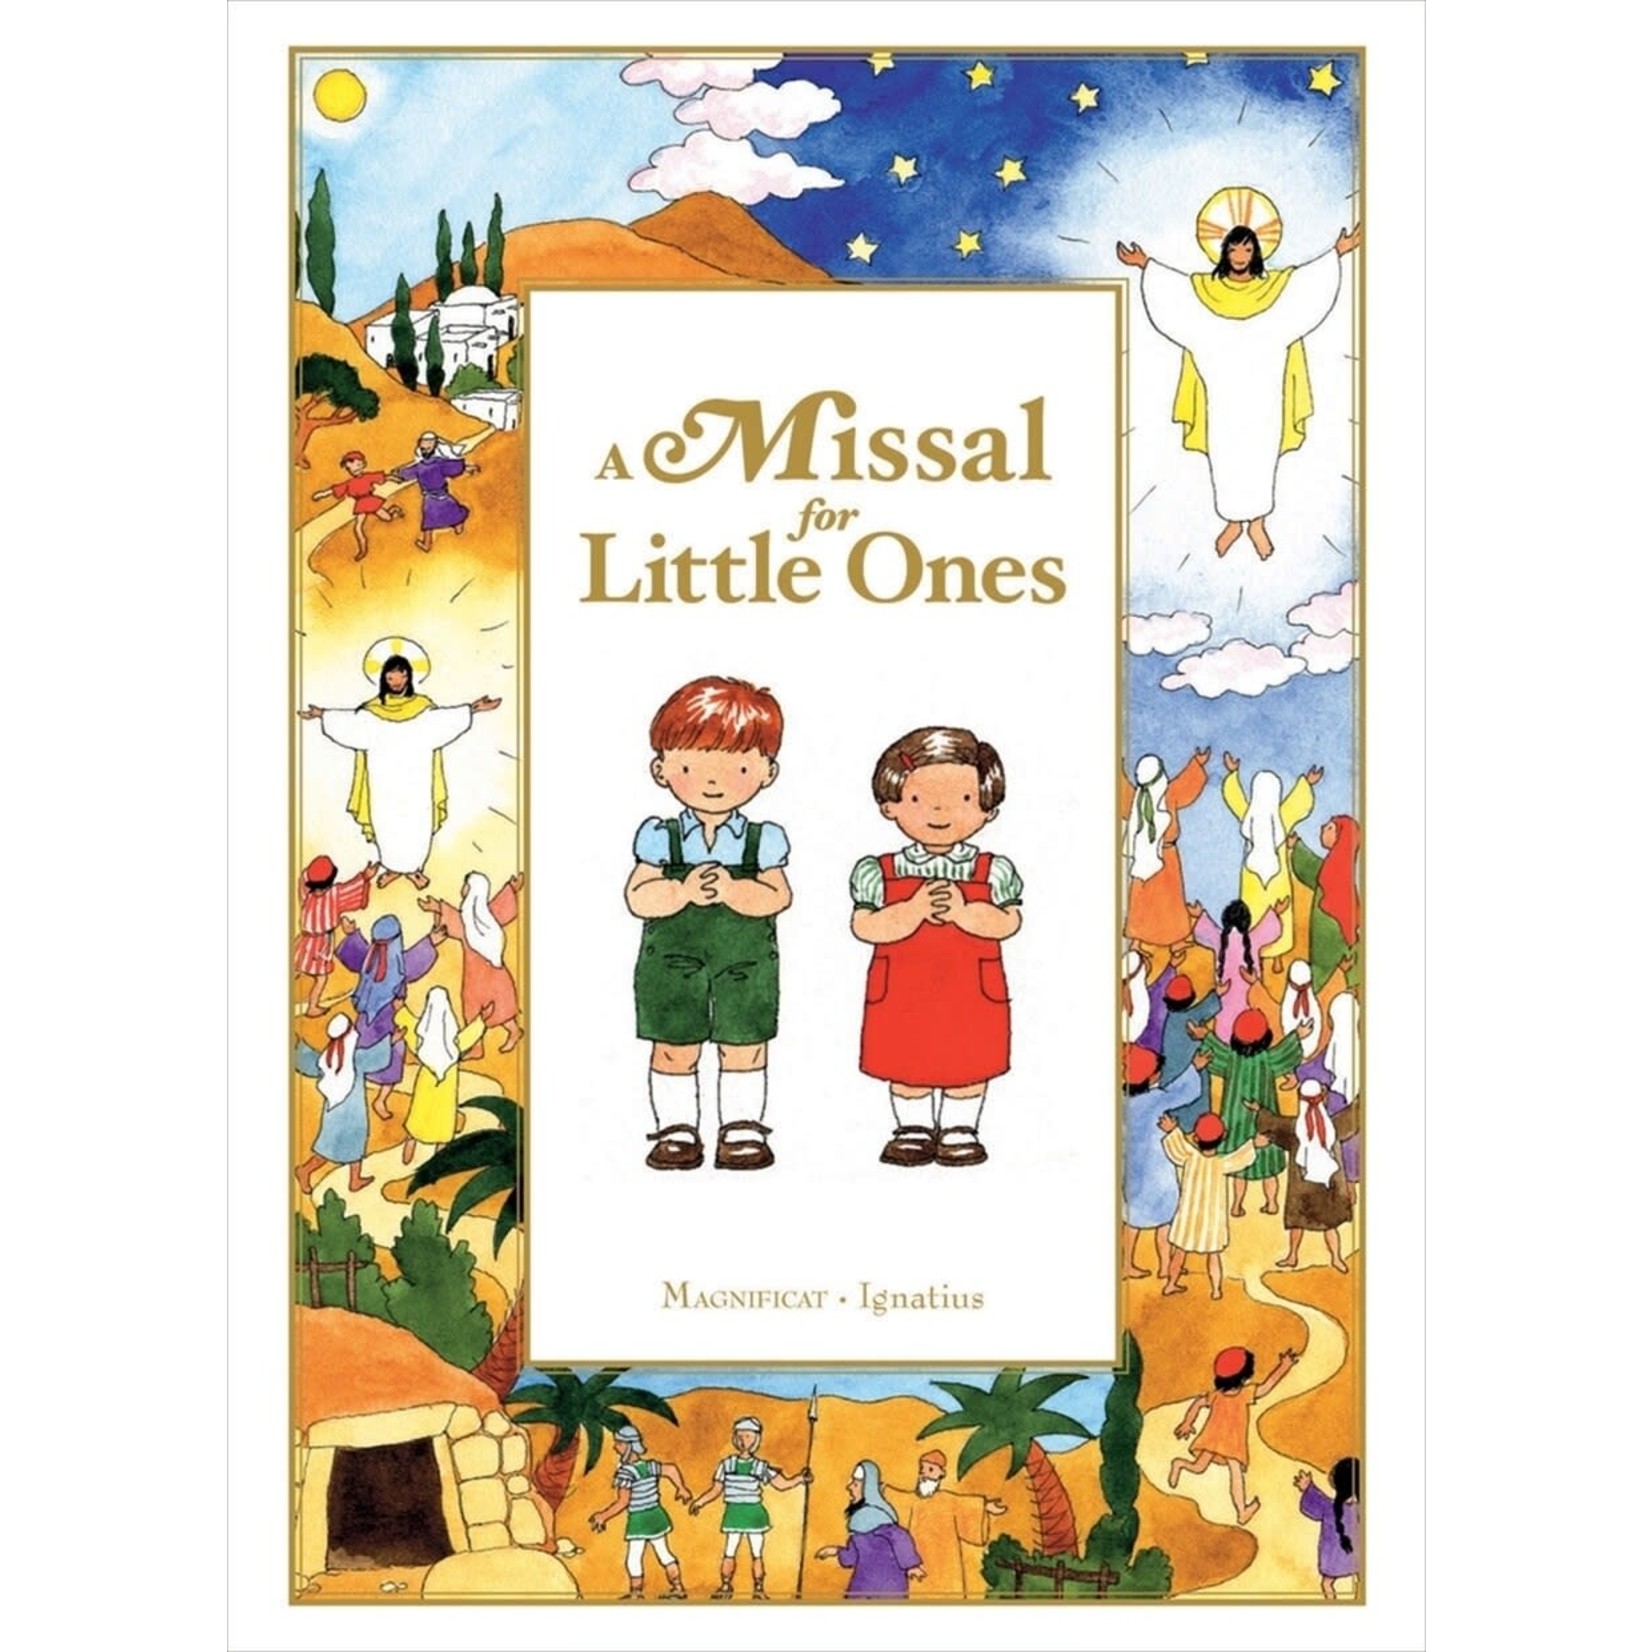 A Missal for Little Ones